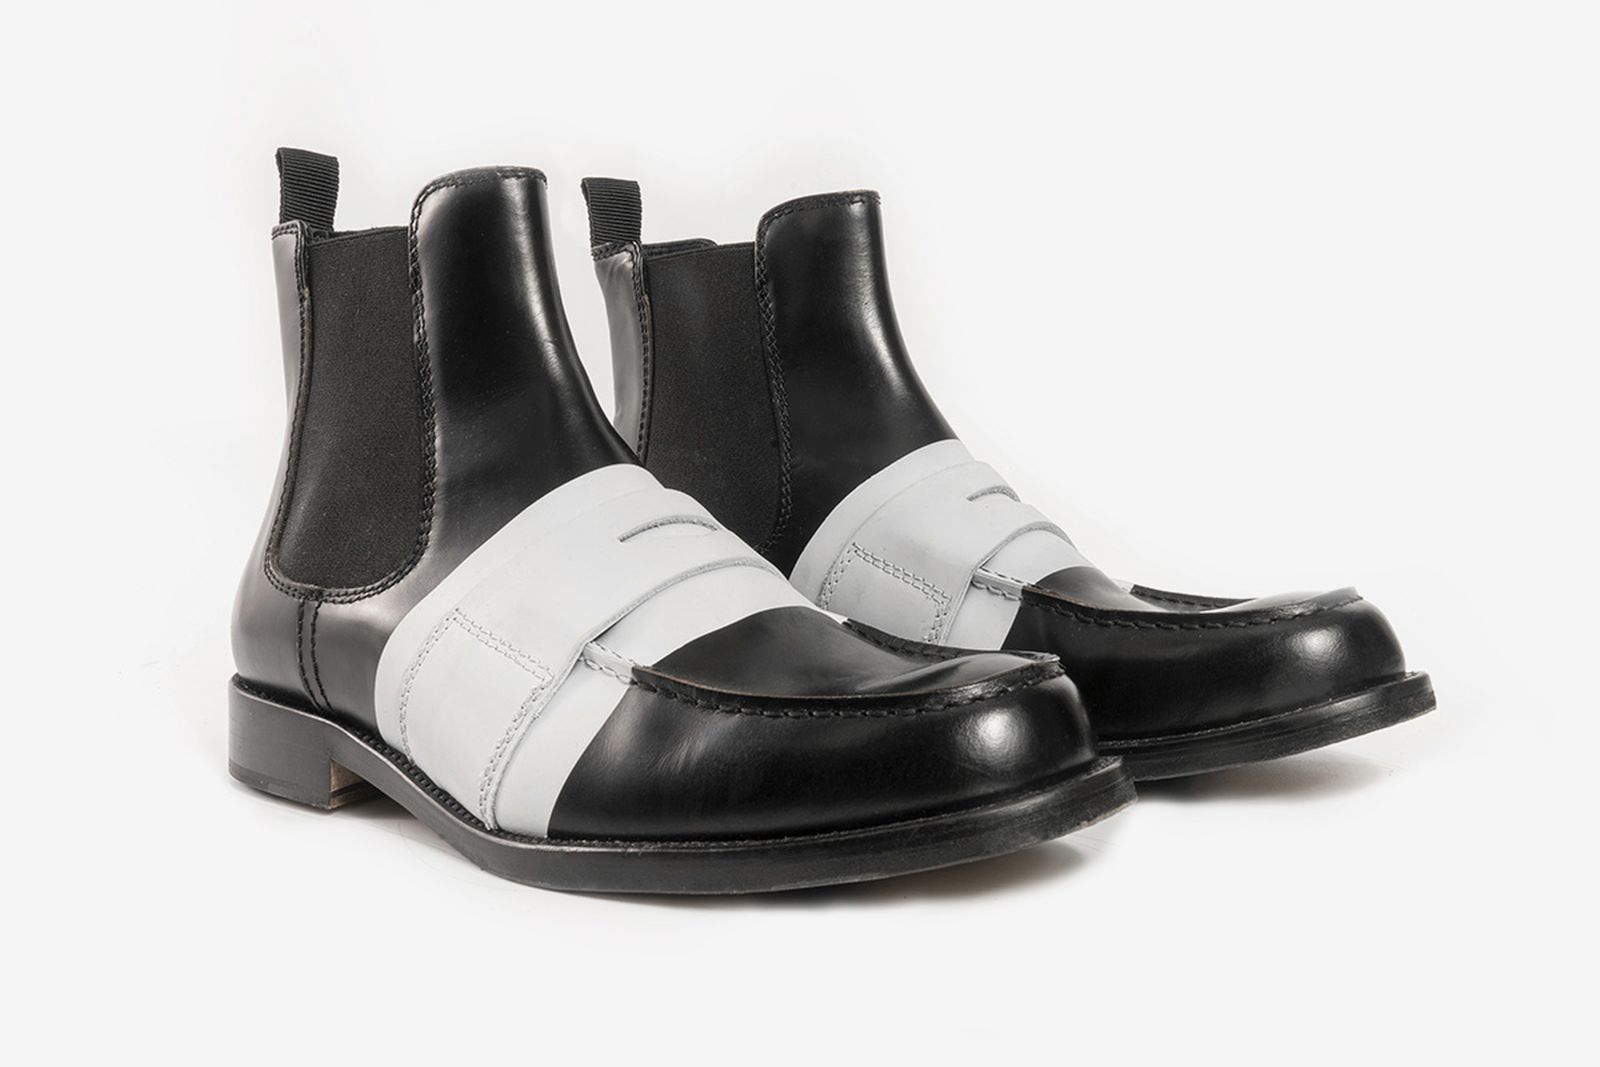 college-loafer-chelsea-boot-hybrid-release-date-price-04